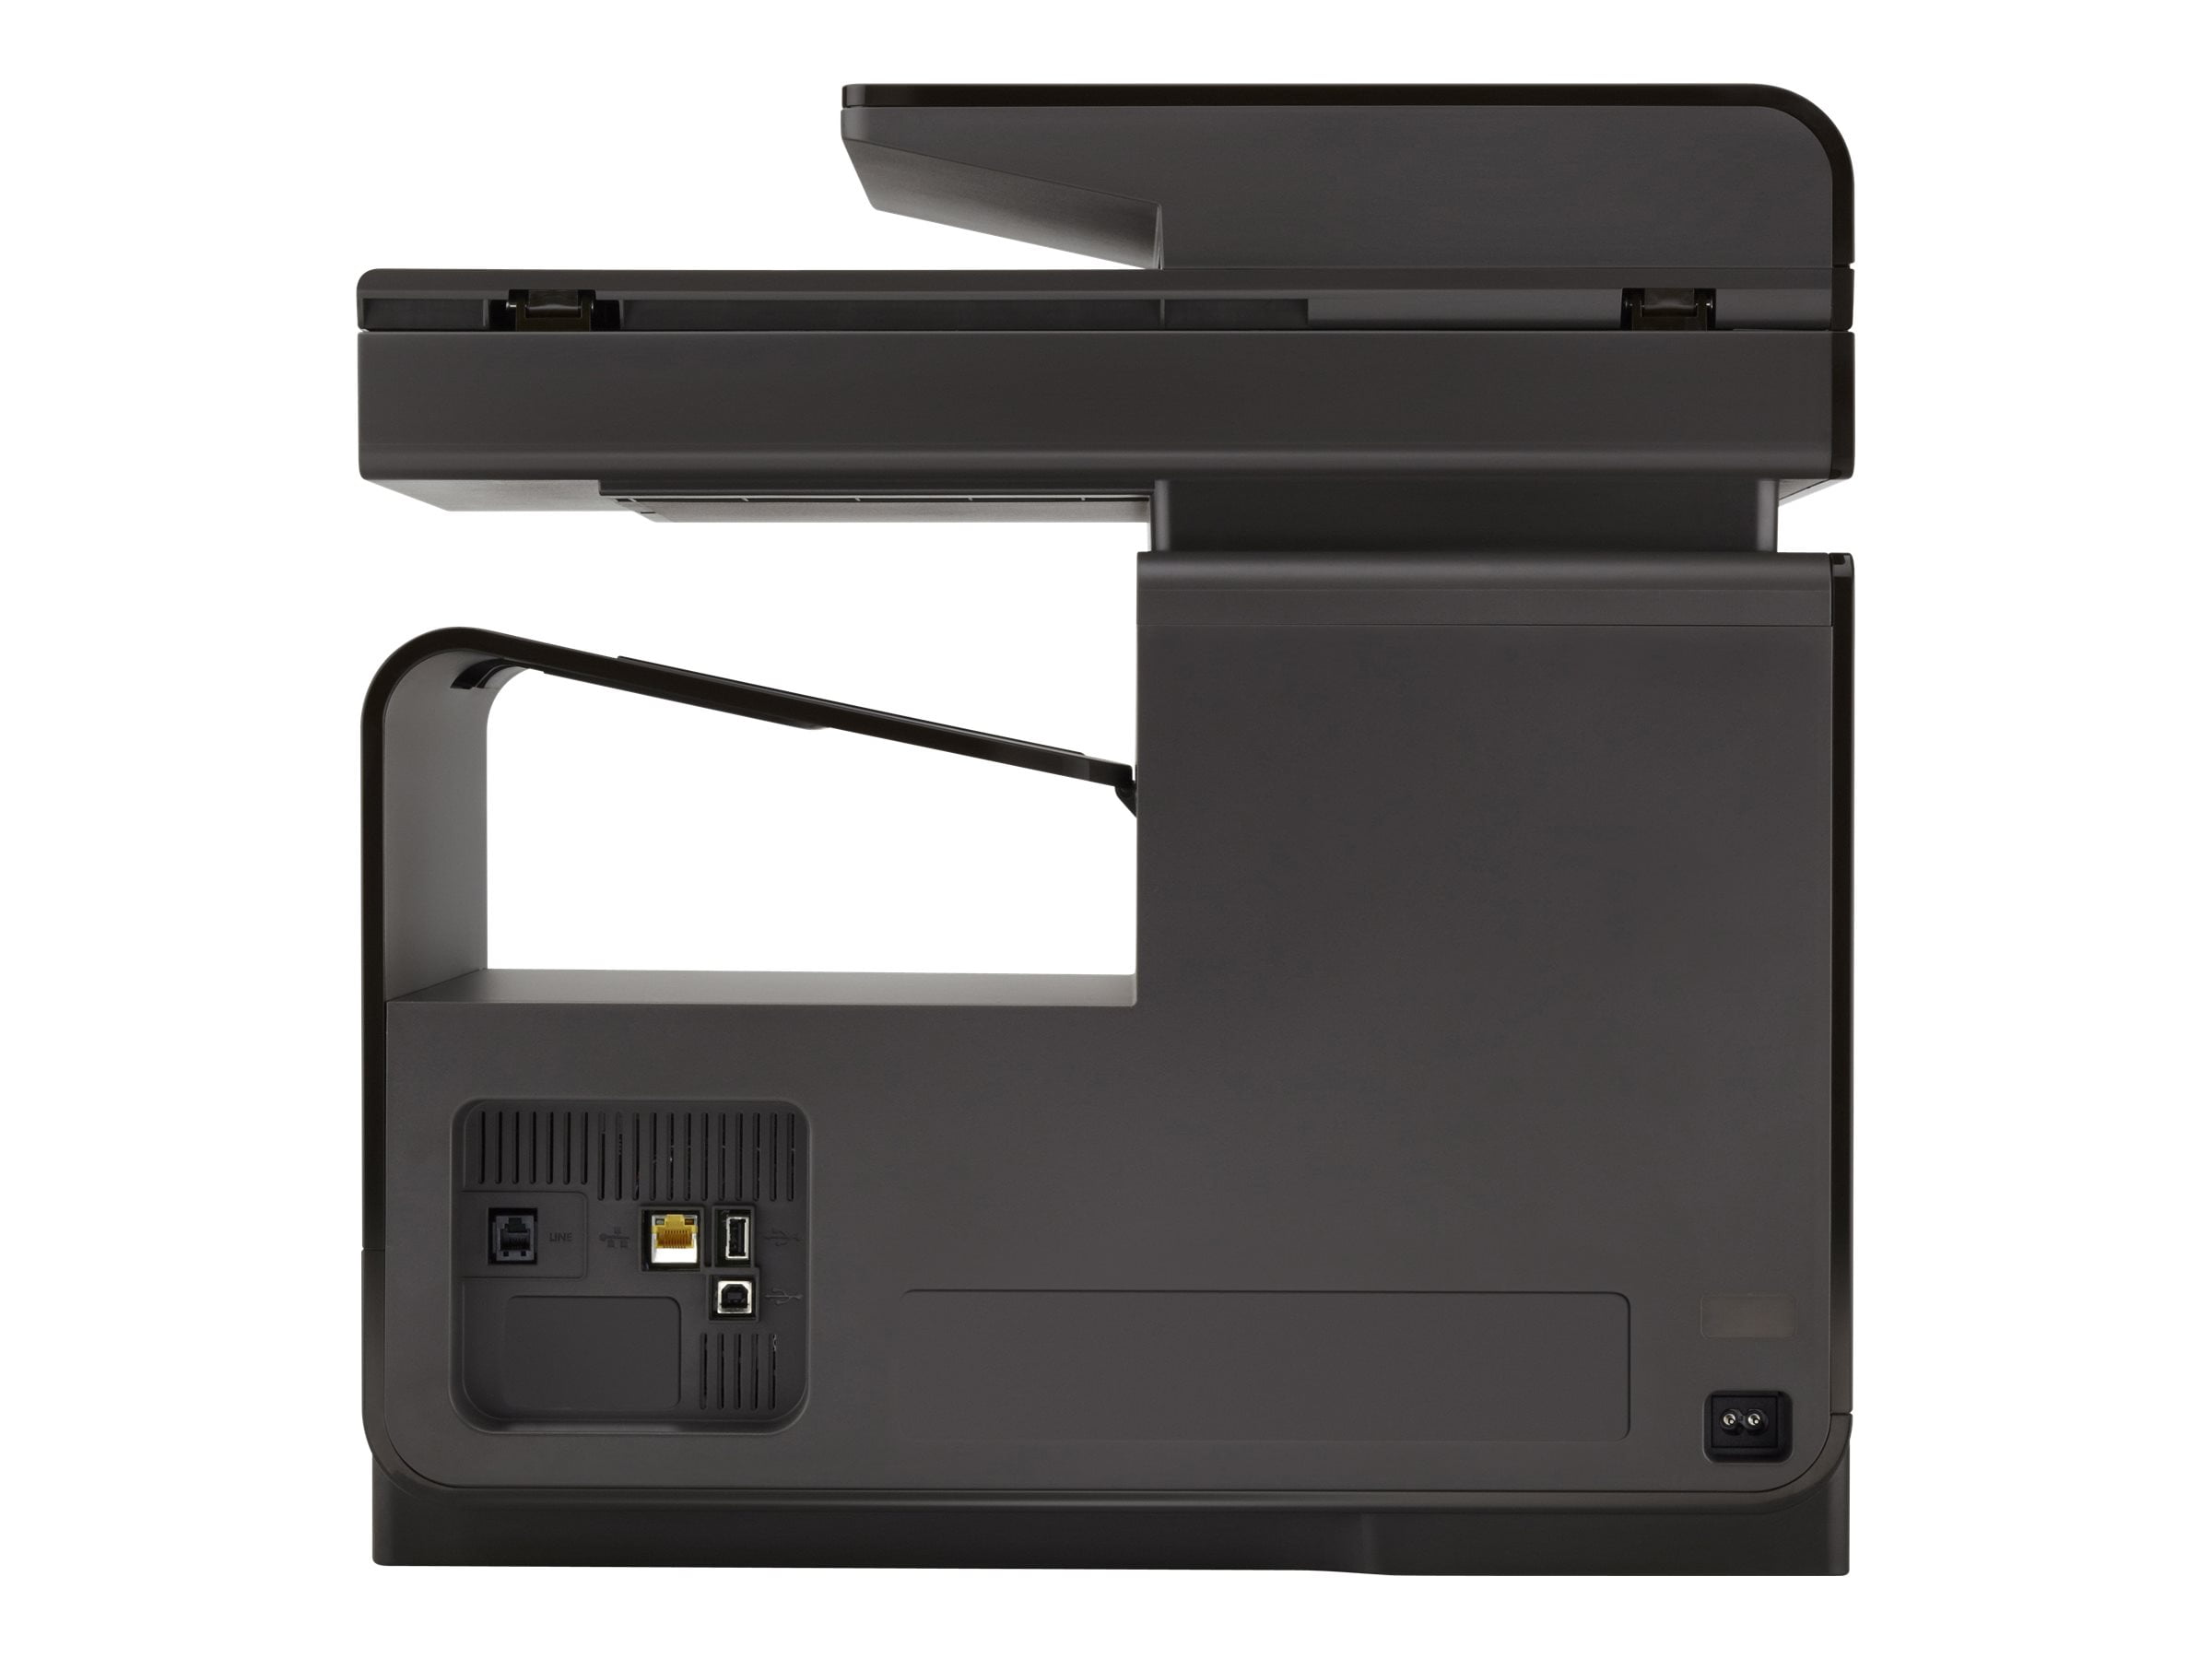 HP Officejet Pro MFP - printer color - ink-jet - Legal (8.5 in x 14 in) (original) - A4/Legal (media) - up to 36 ppm (copying) up to